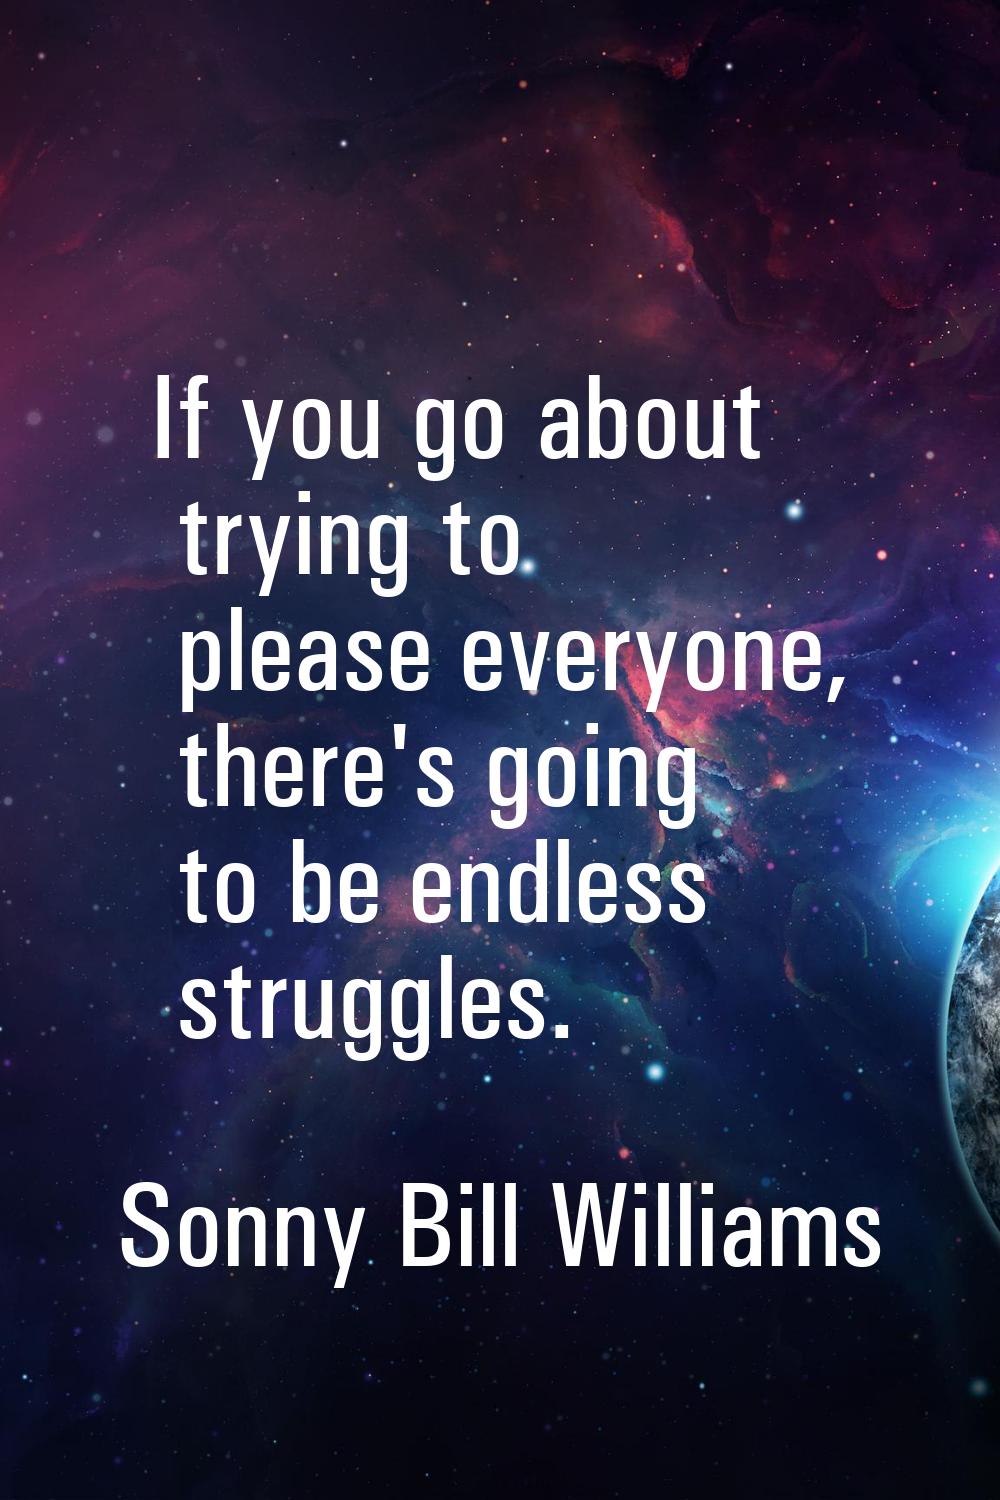 If you go about trying to please everyone, there's going to be endless struggles.